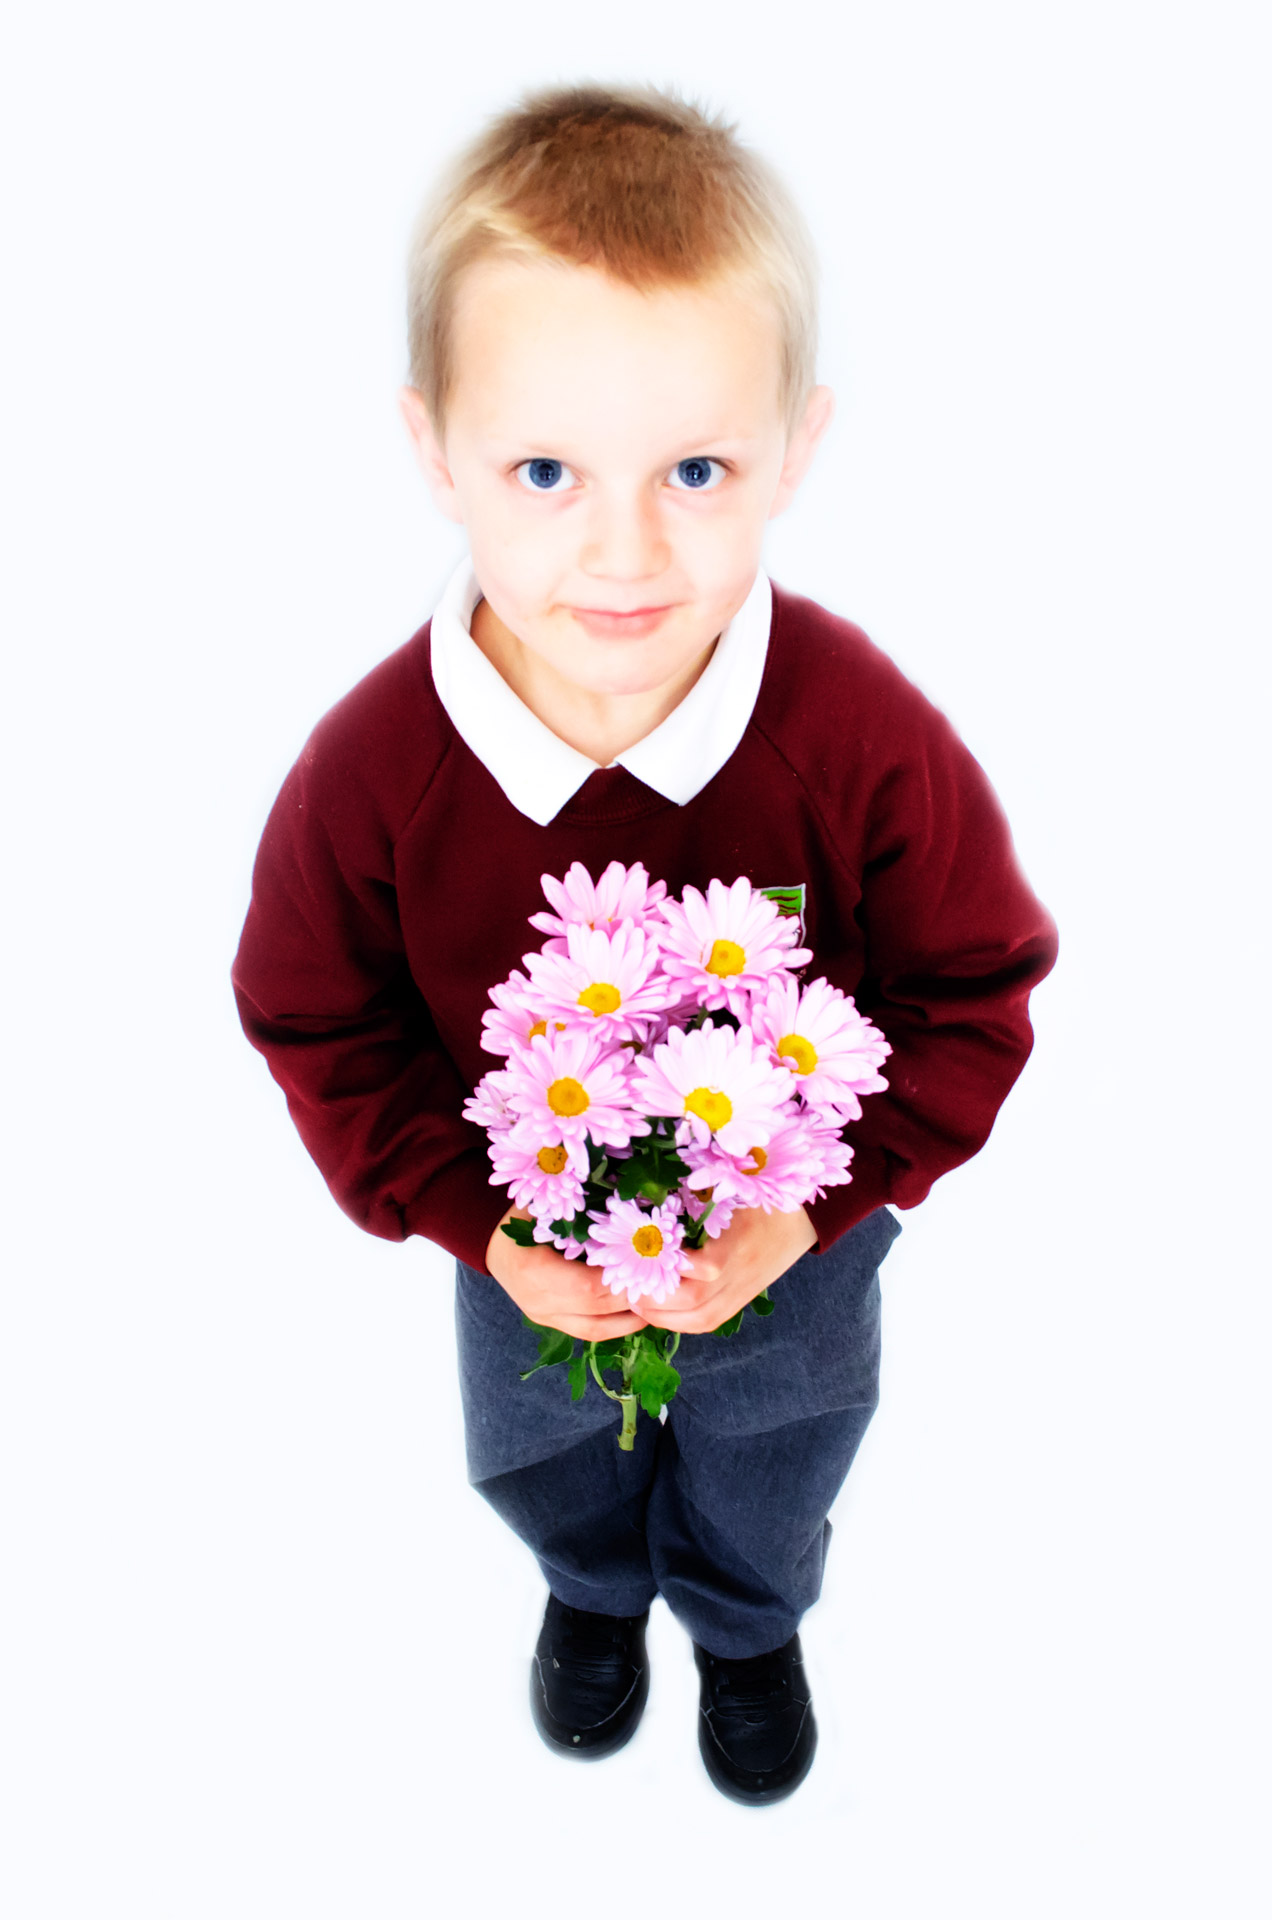 Child And Flowers